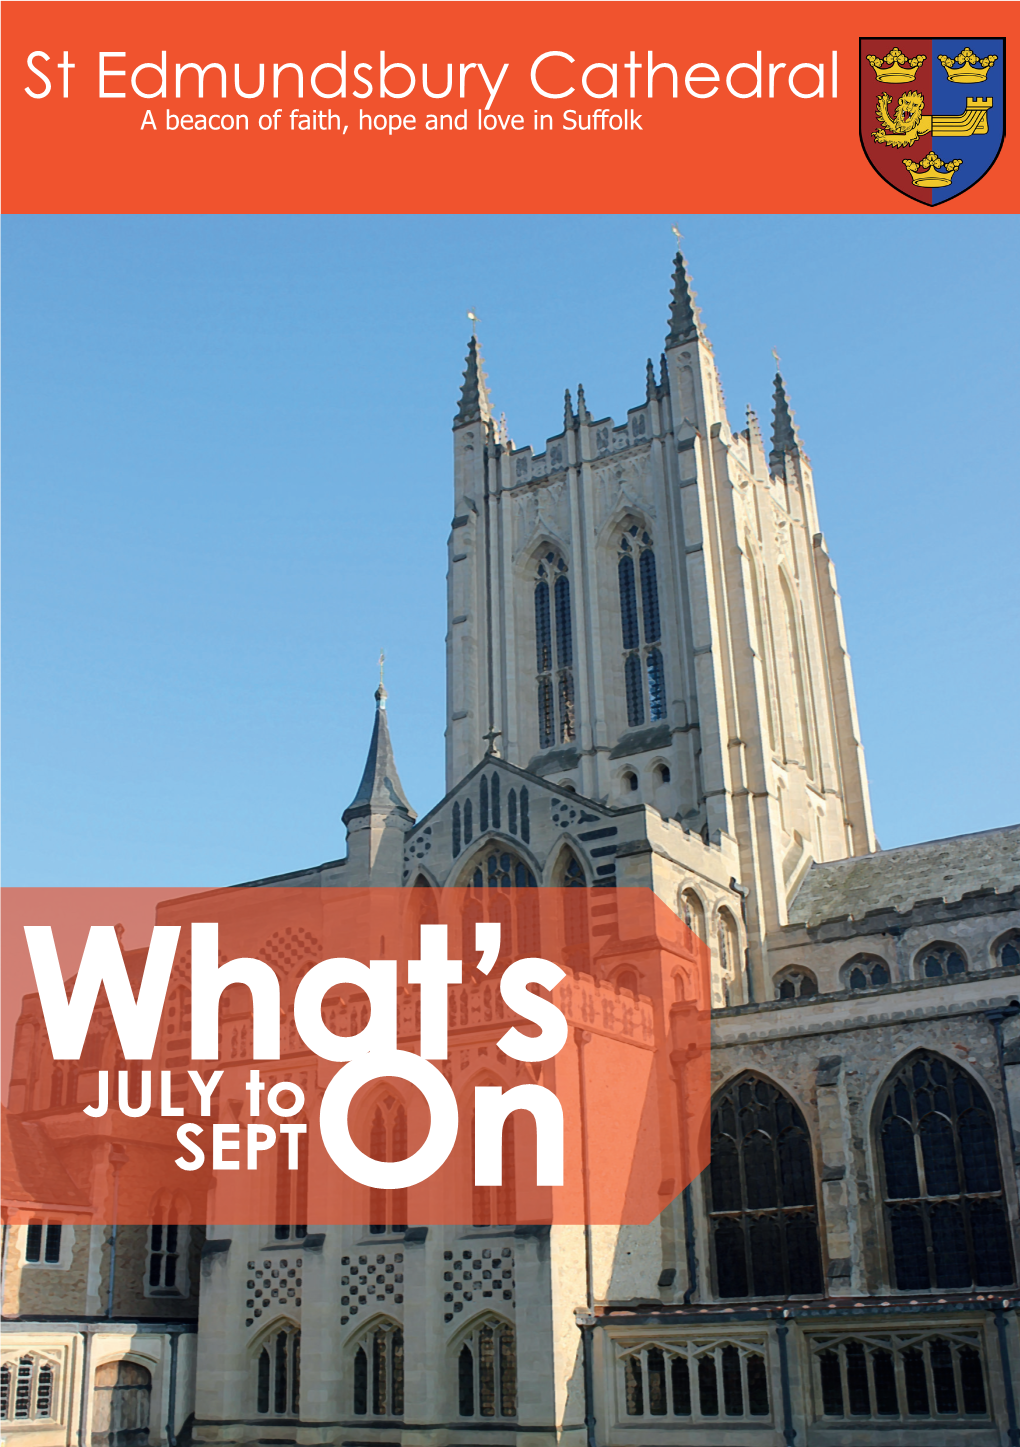 St Edmundsbury Cathedral JULY to SEPT